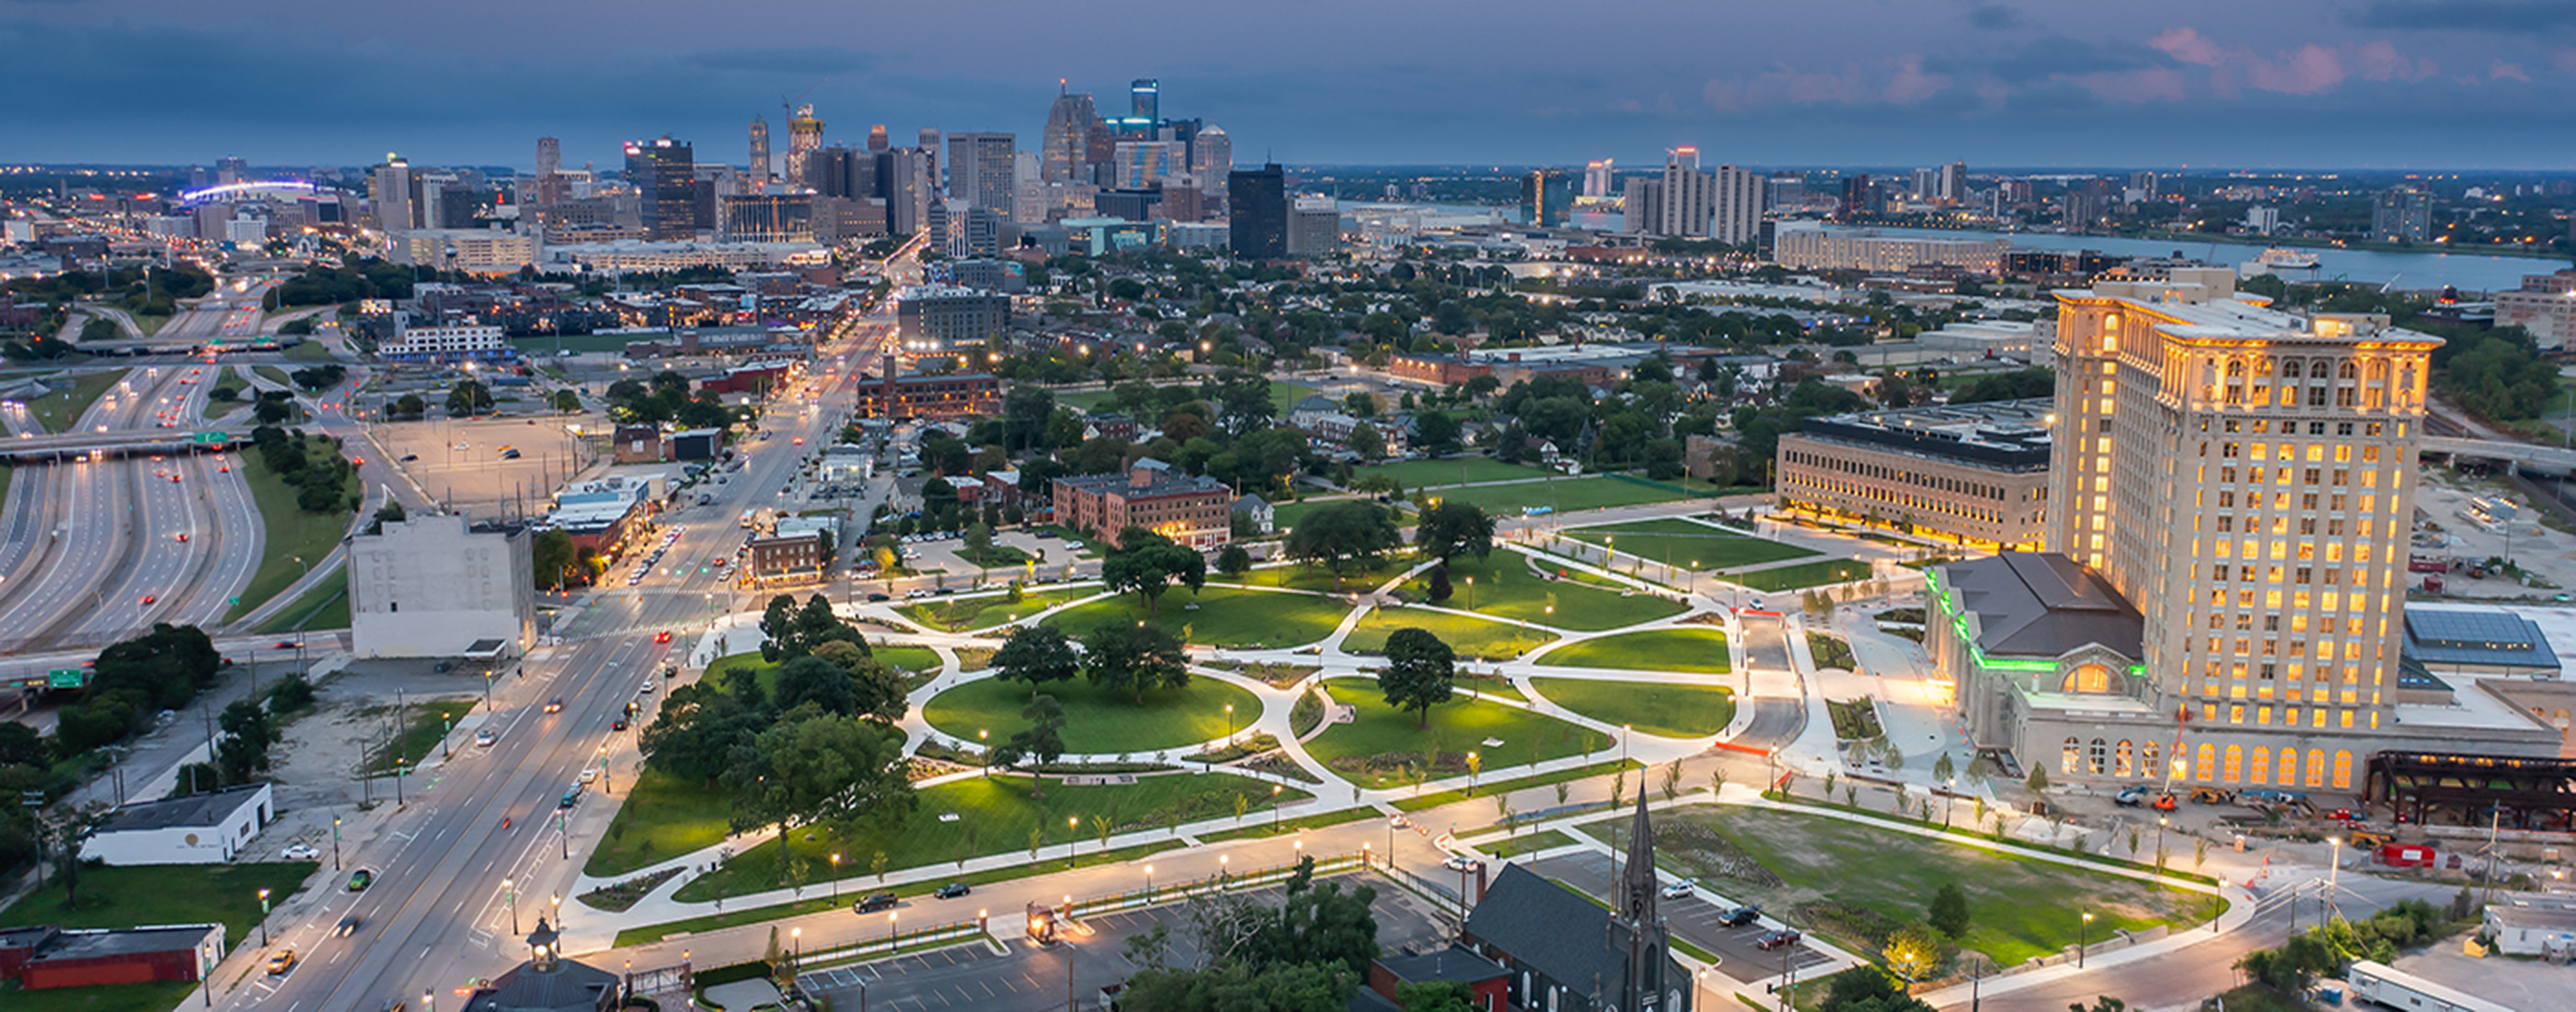 The enhanced Roosevelt Park connects two Detroit neighborhoods